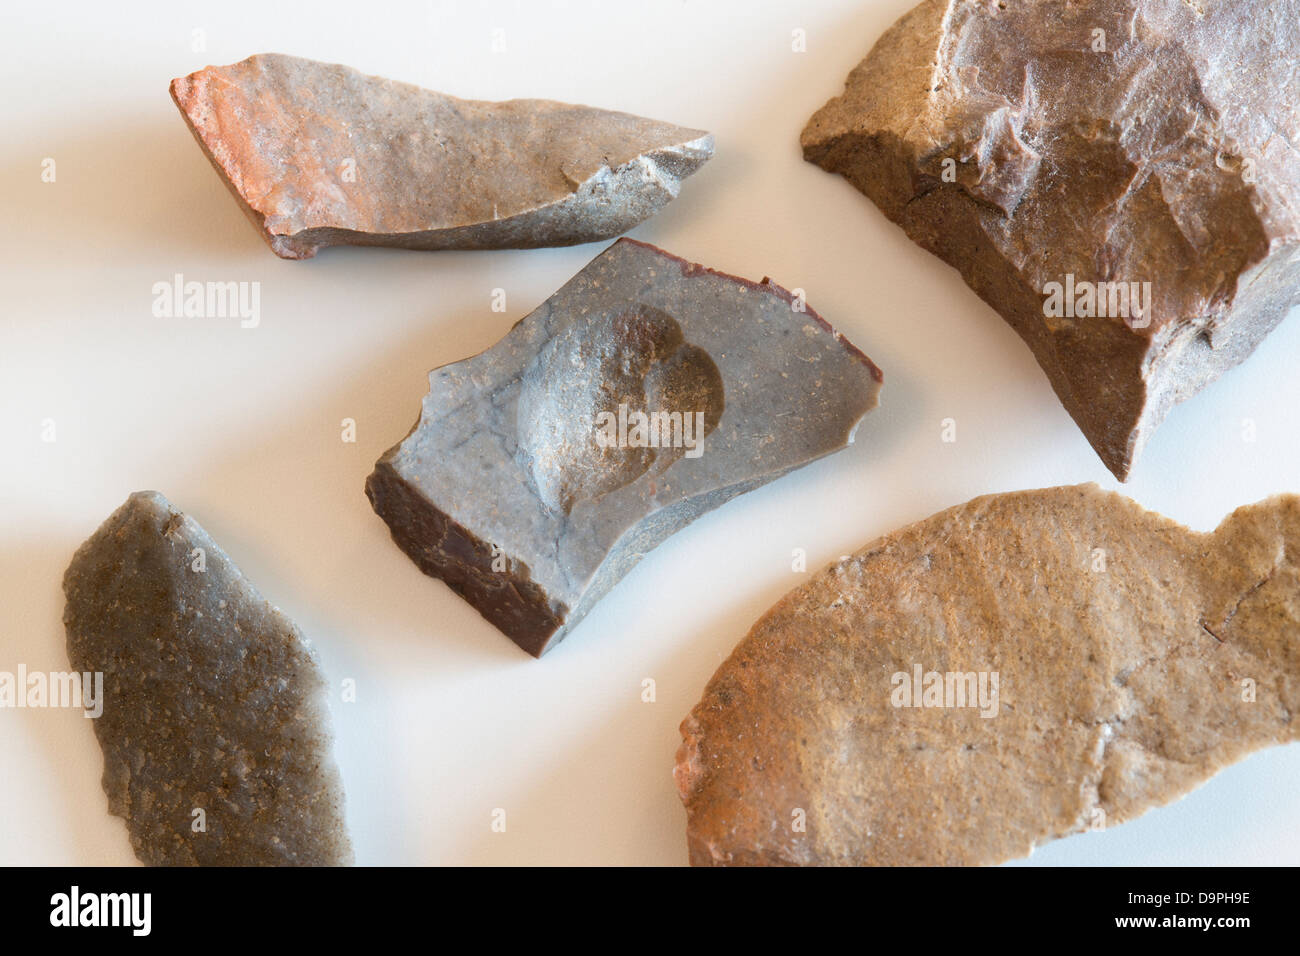 A close-up shot of some aboriginal stone cutting tools. These were found on a beach in Wollongong, Australia. Stock Photo